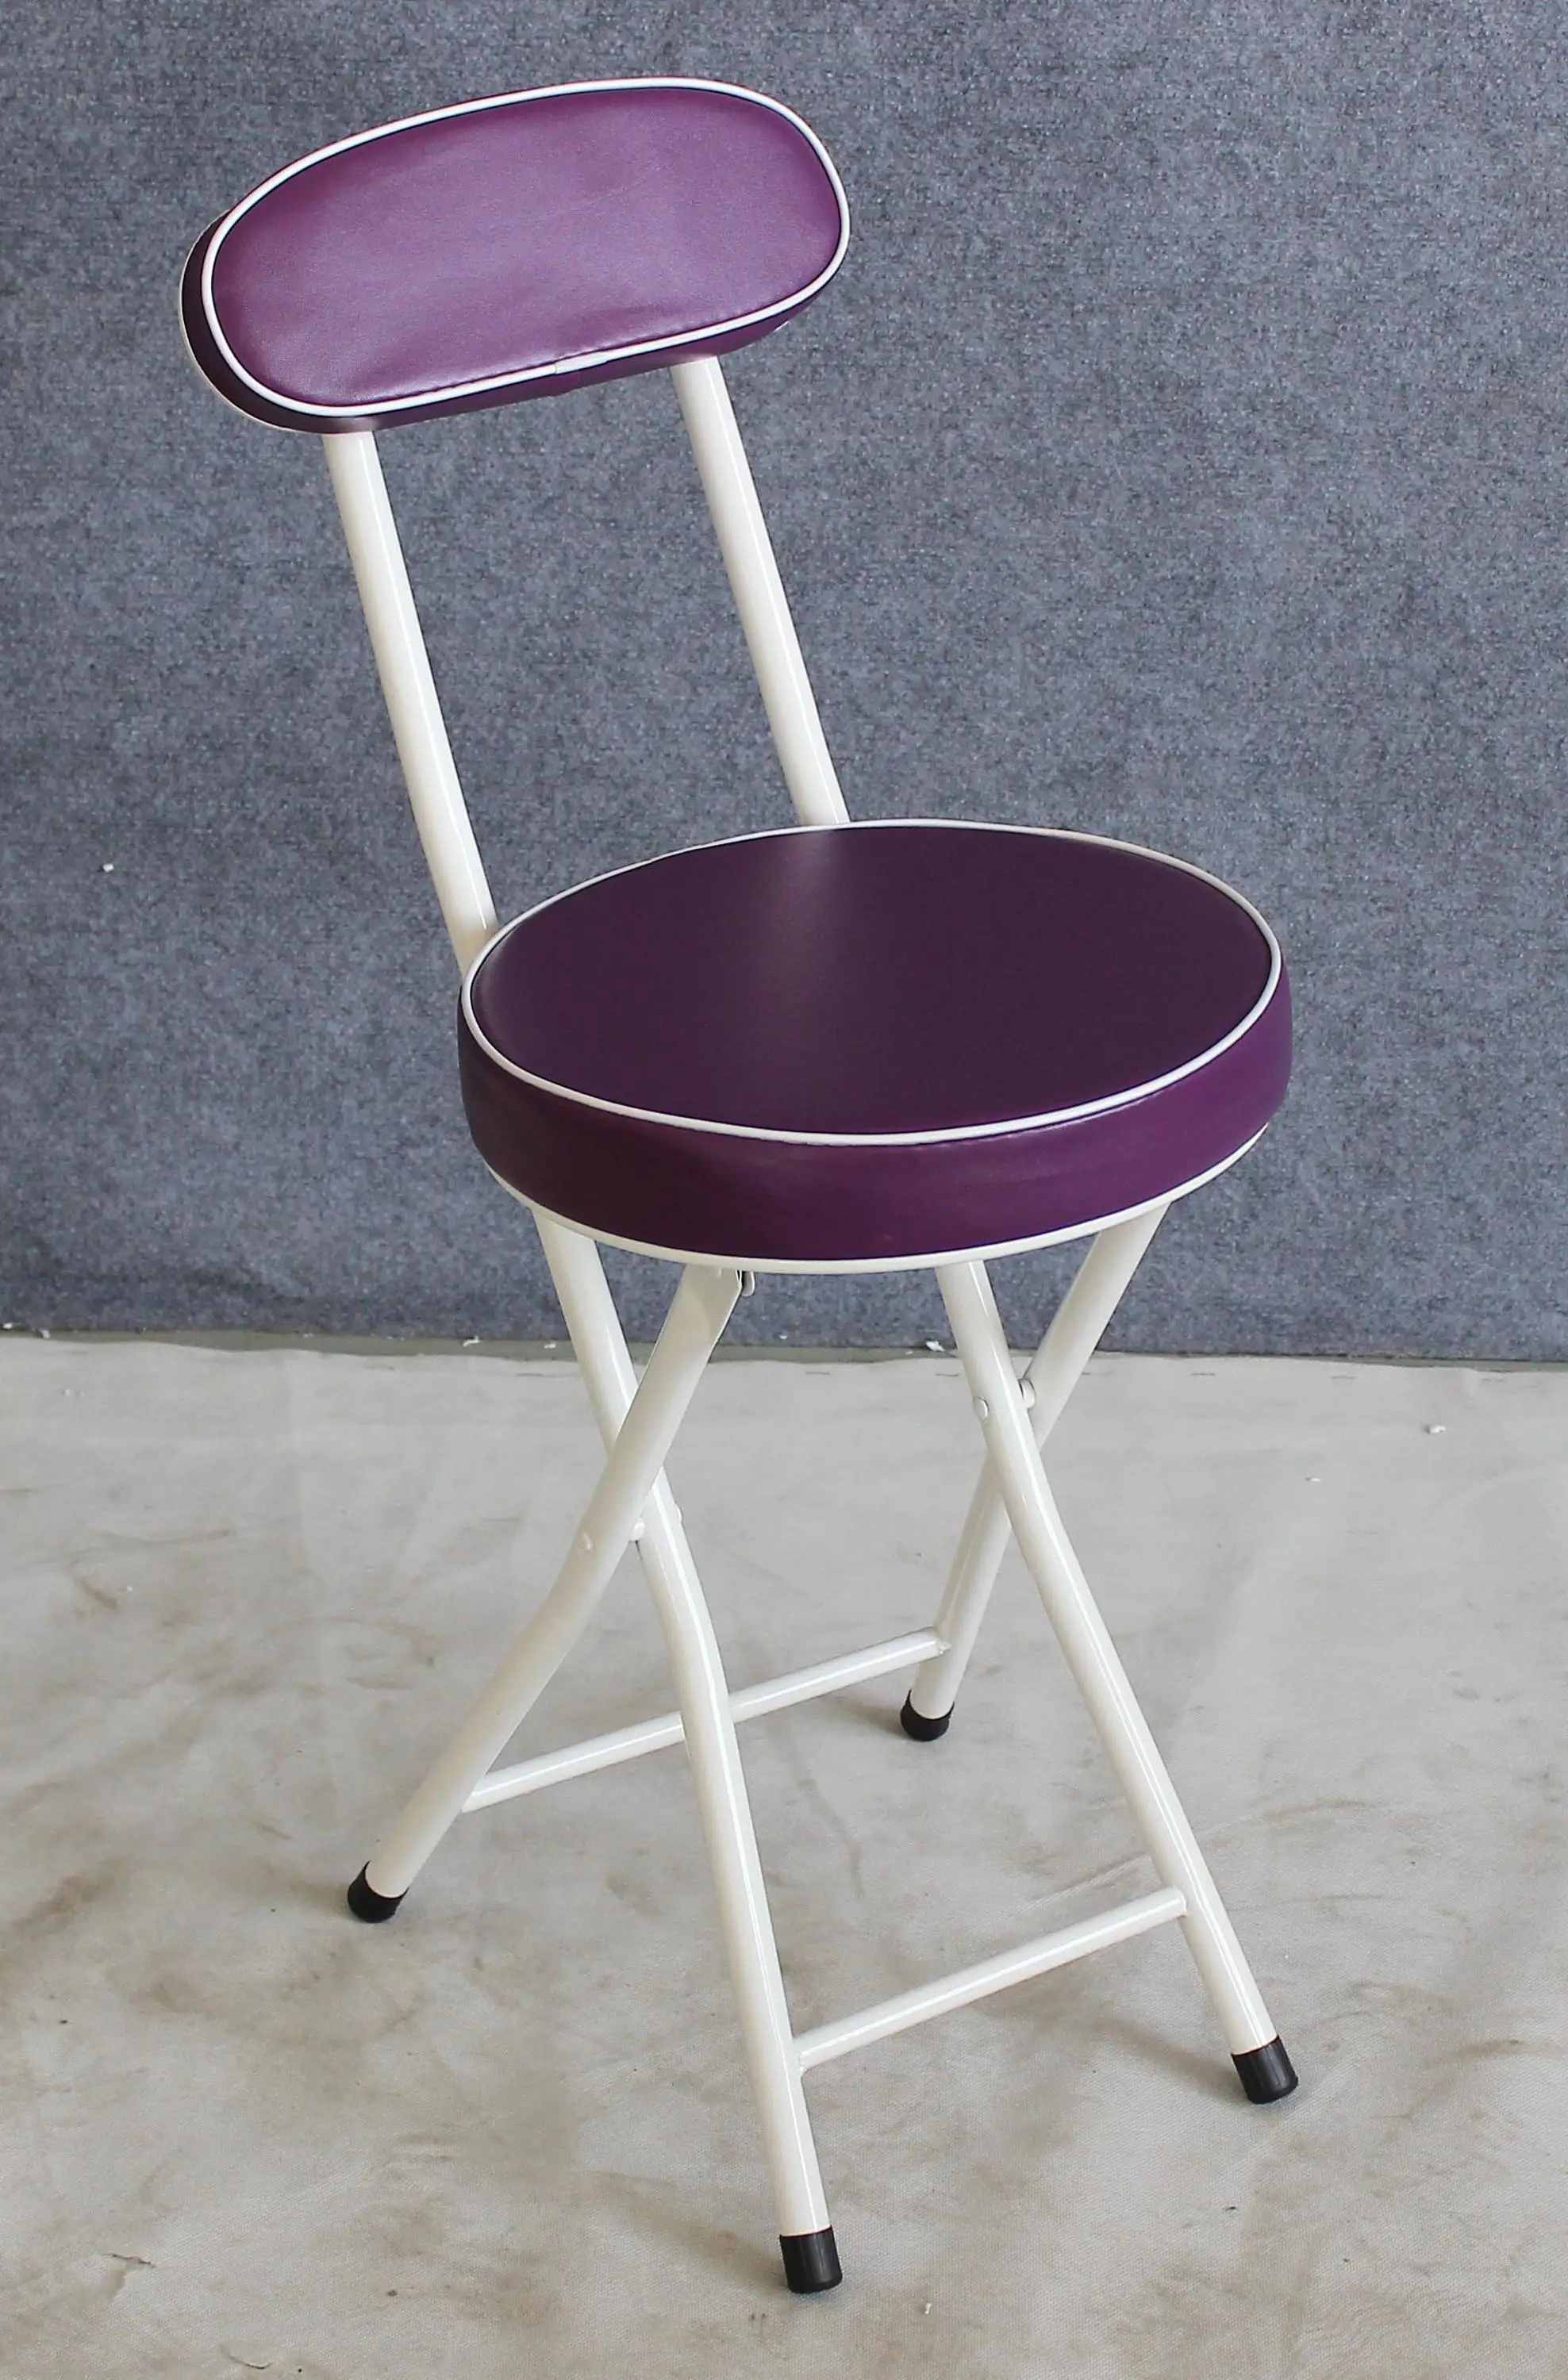 Small Round Folding Chair With Durable And Padded Seating